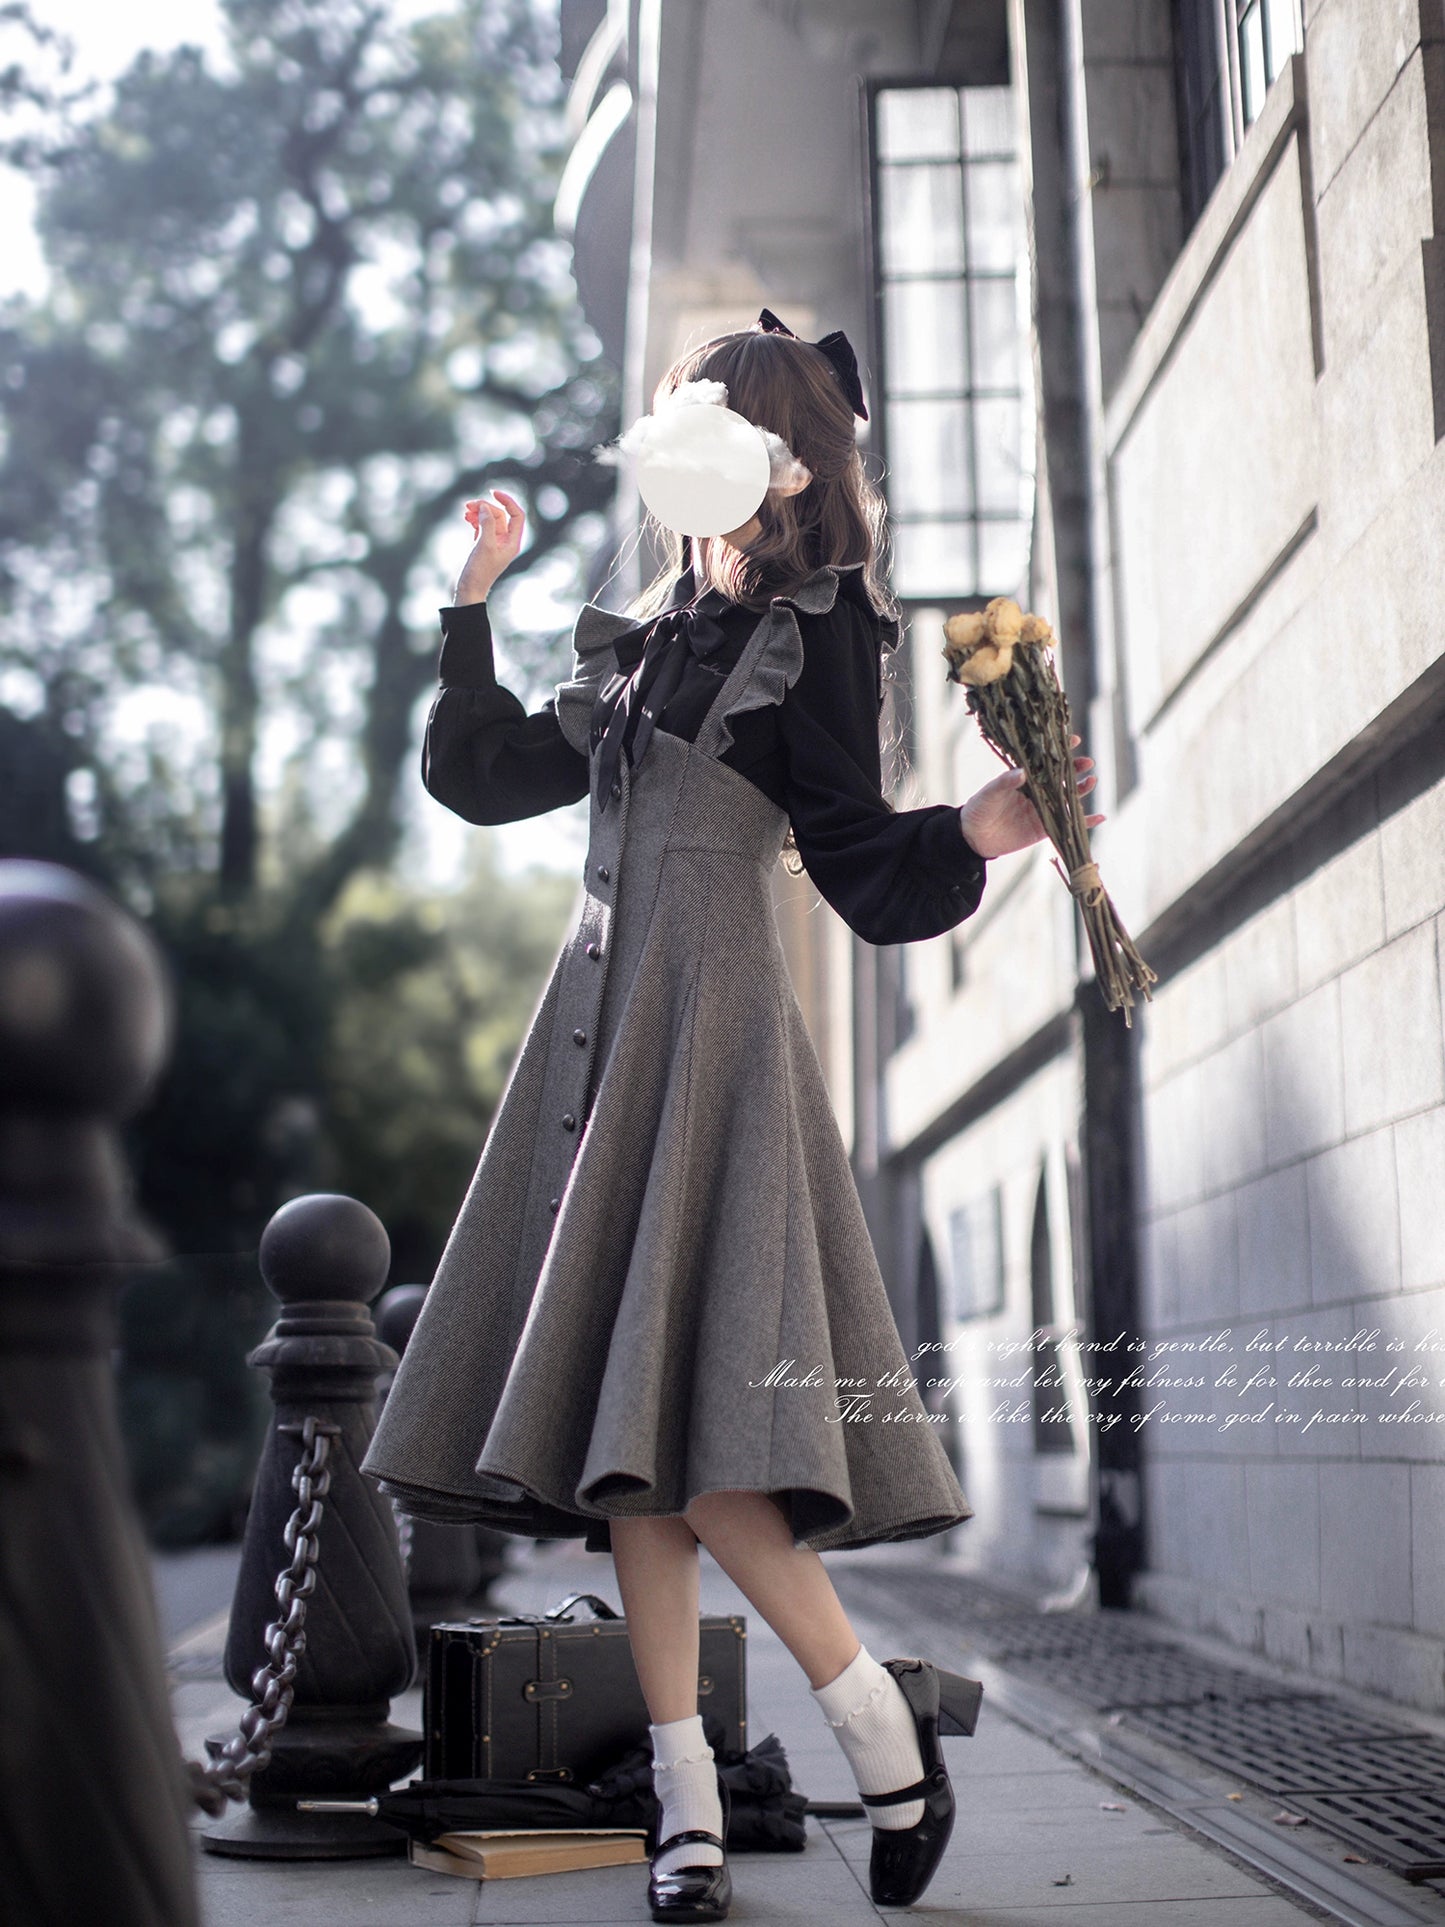 Gray metal button jumper skirt and ribbon tie blouse